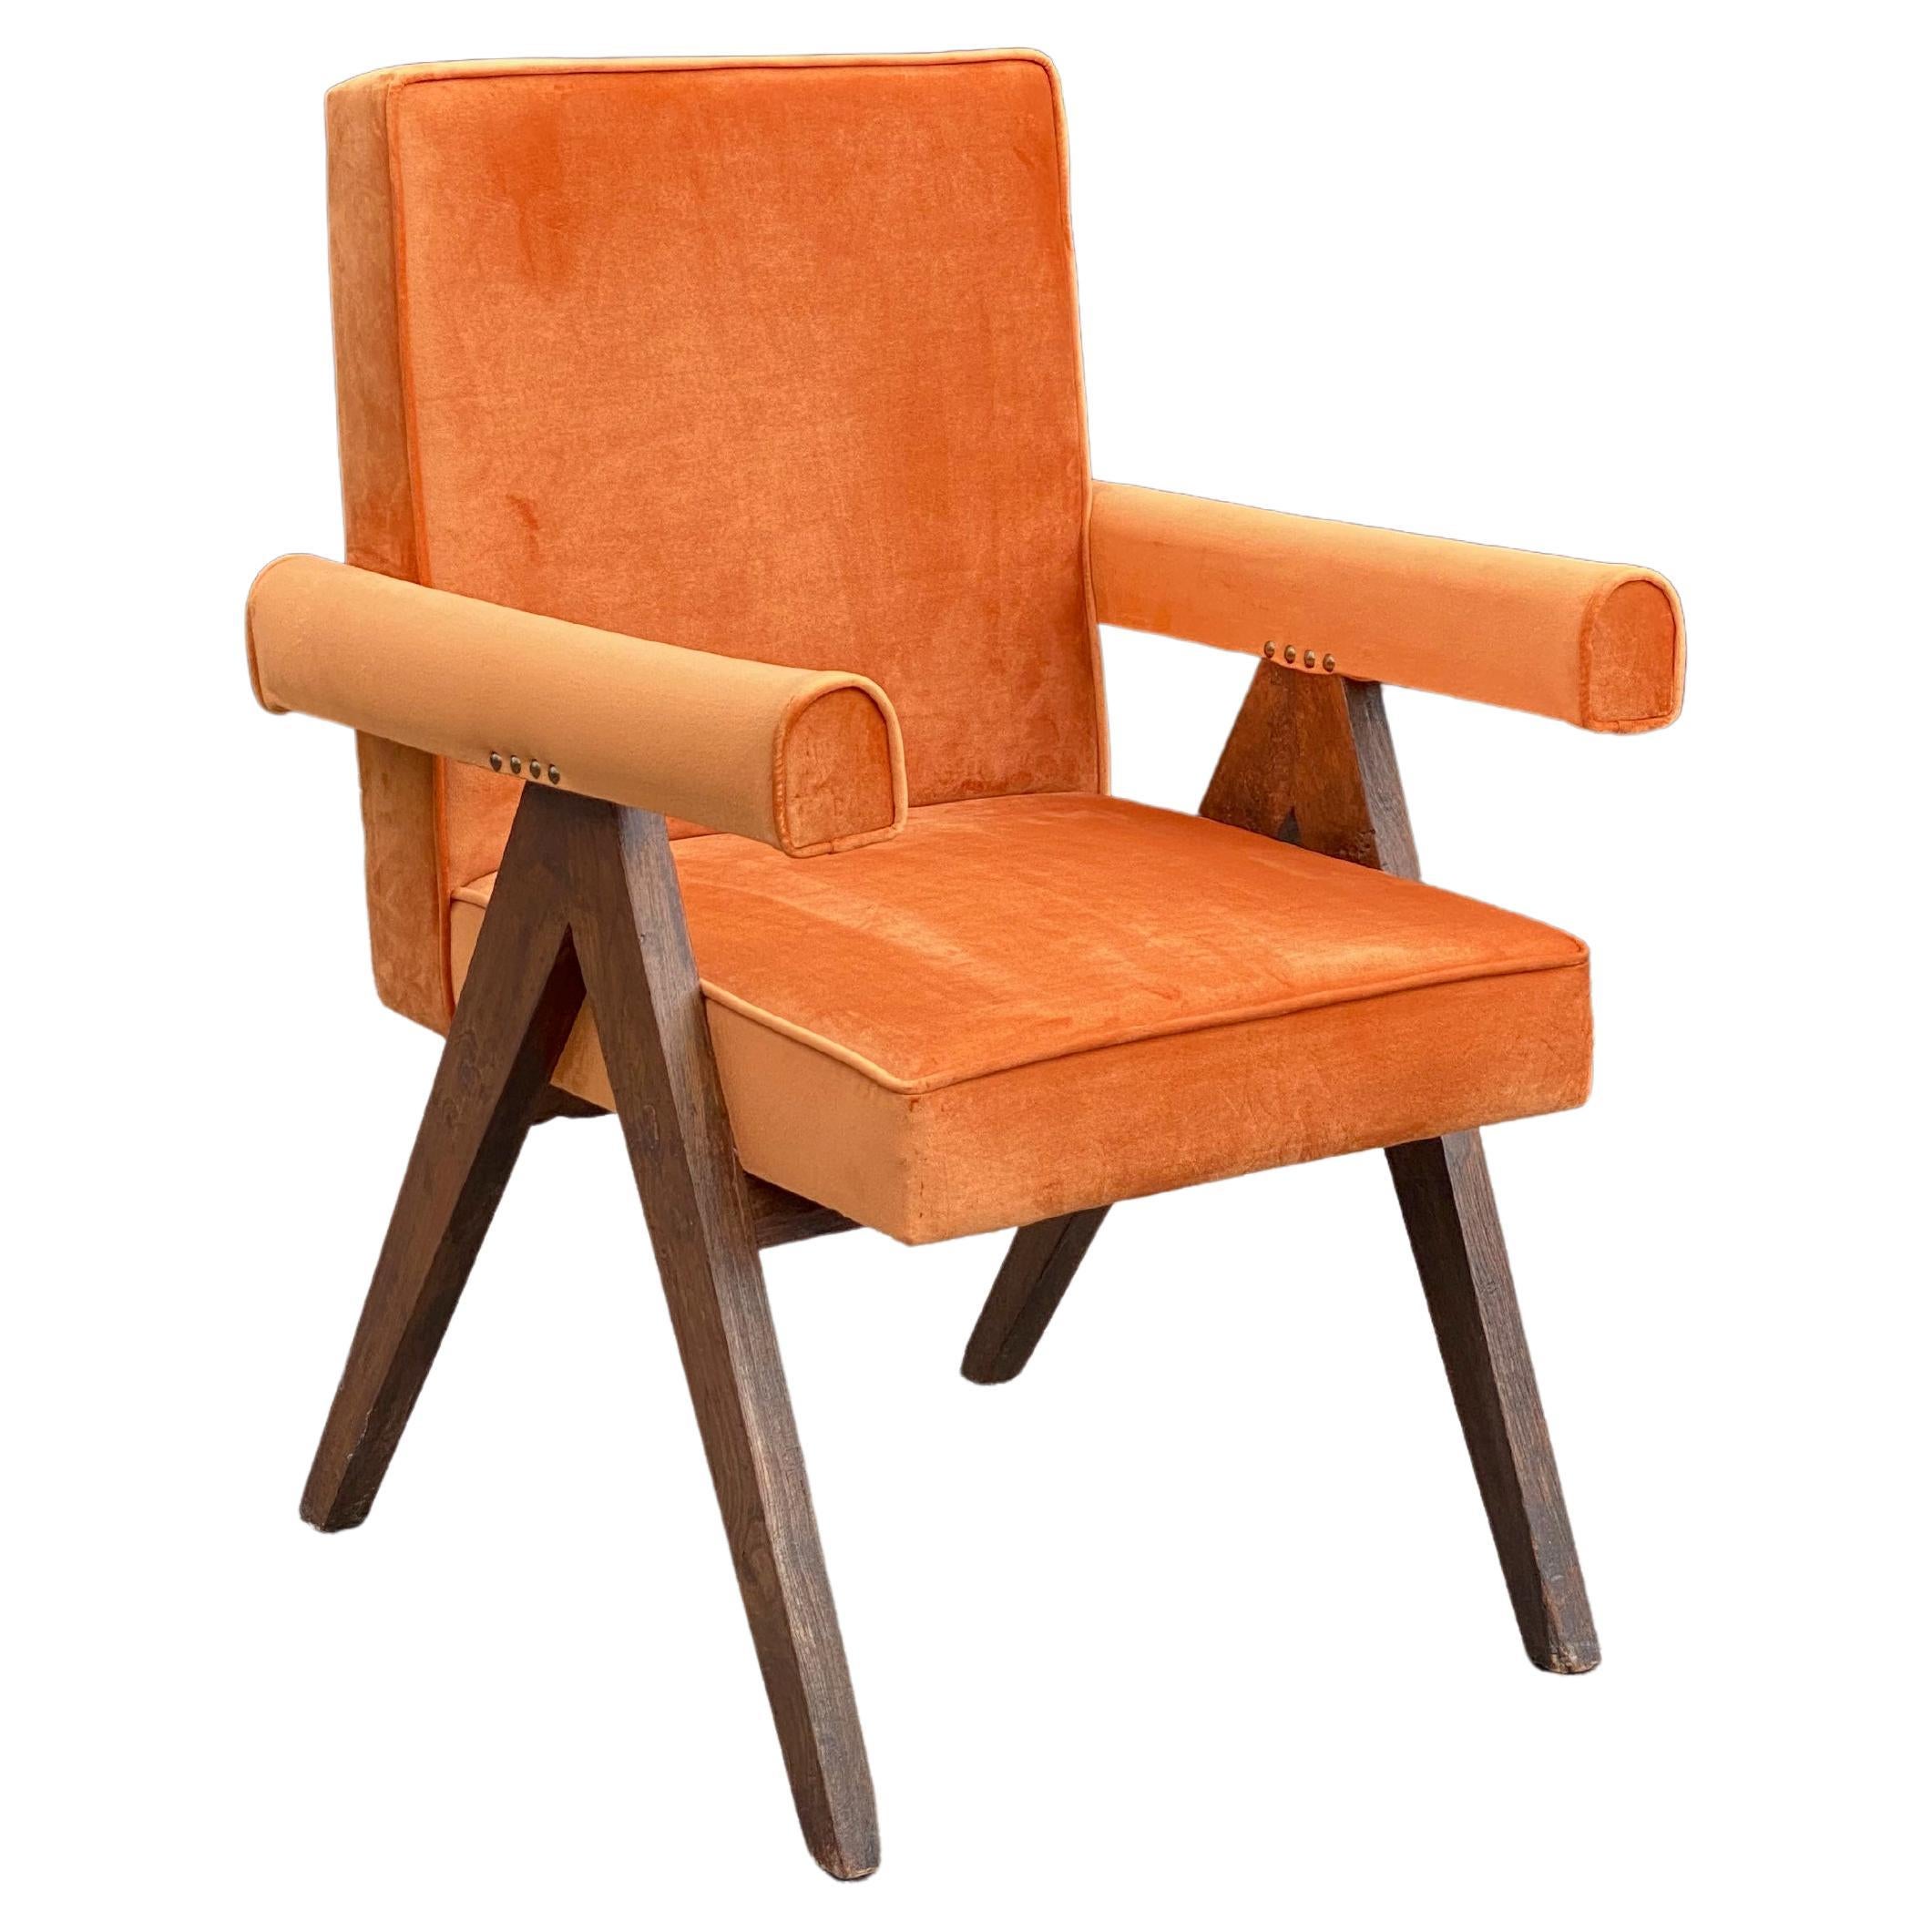 Pierre Jeanneret Committee Chair Orange Certificate by Jacques Dworczak 1953  For Sale